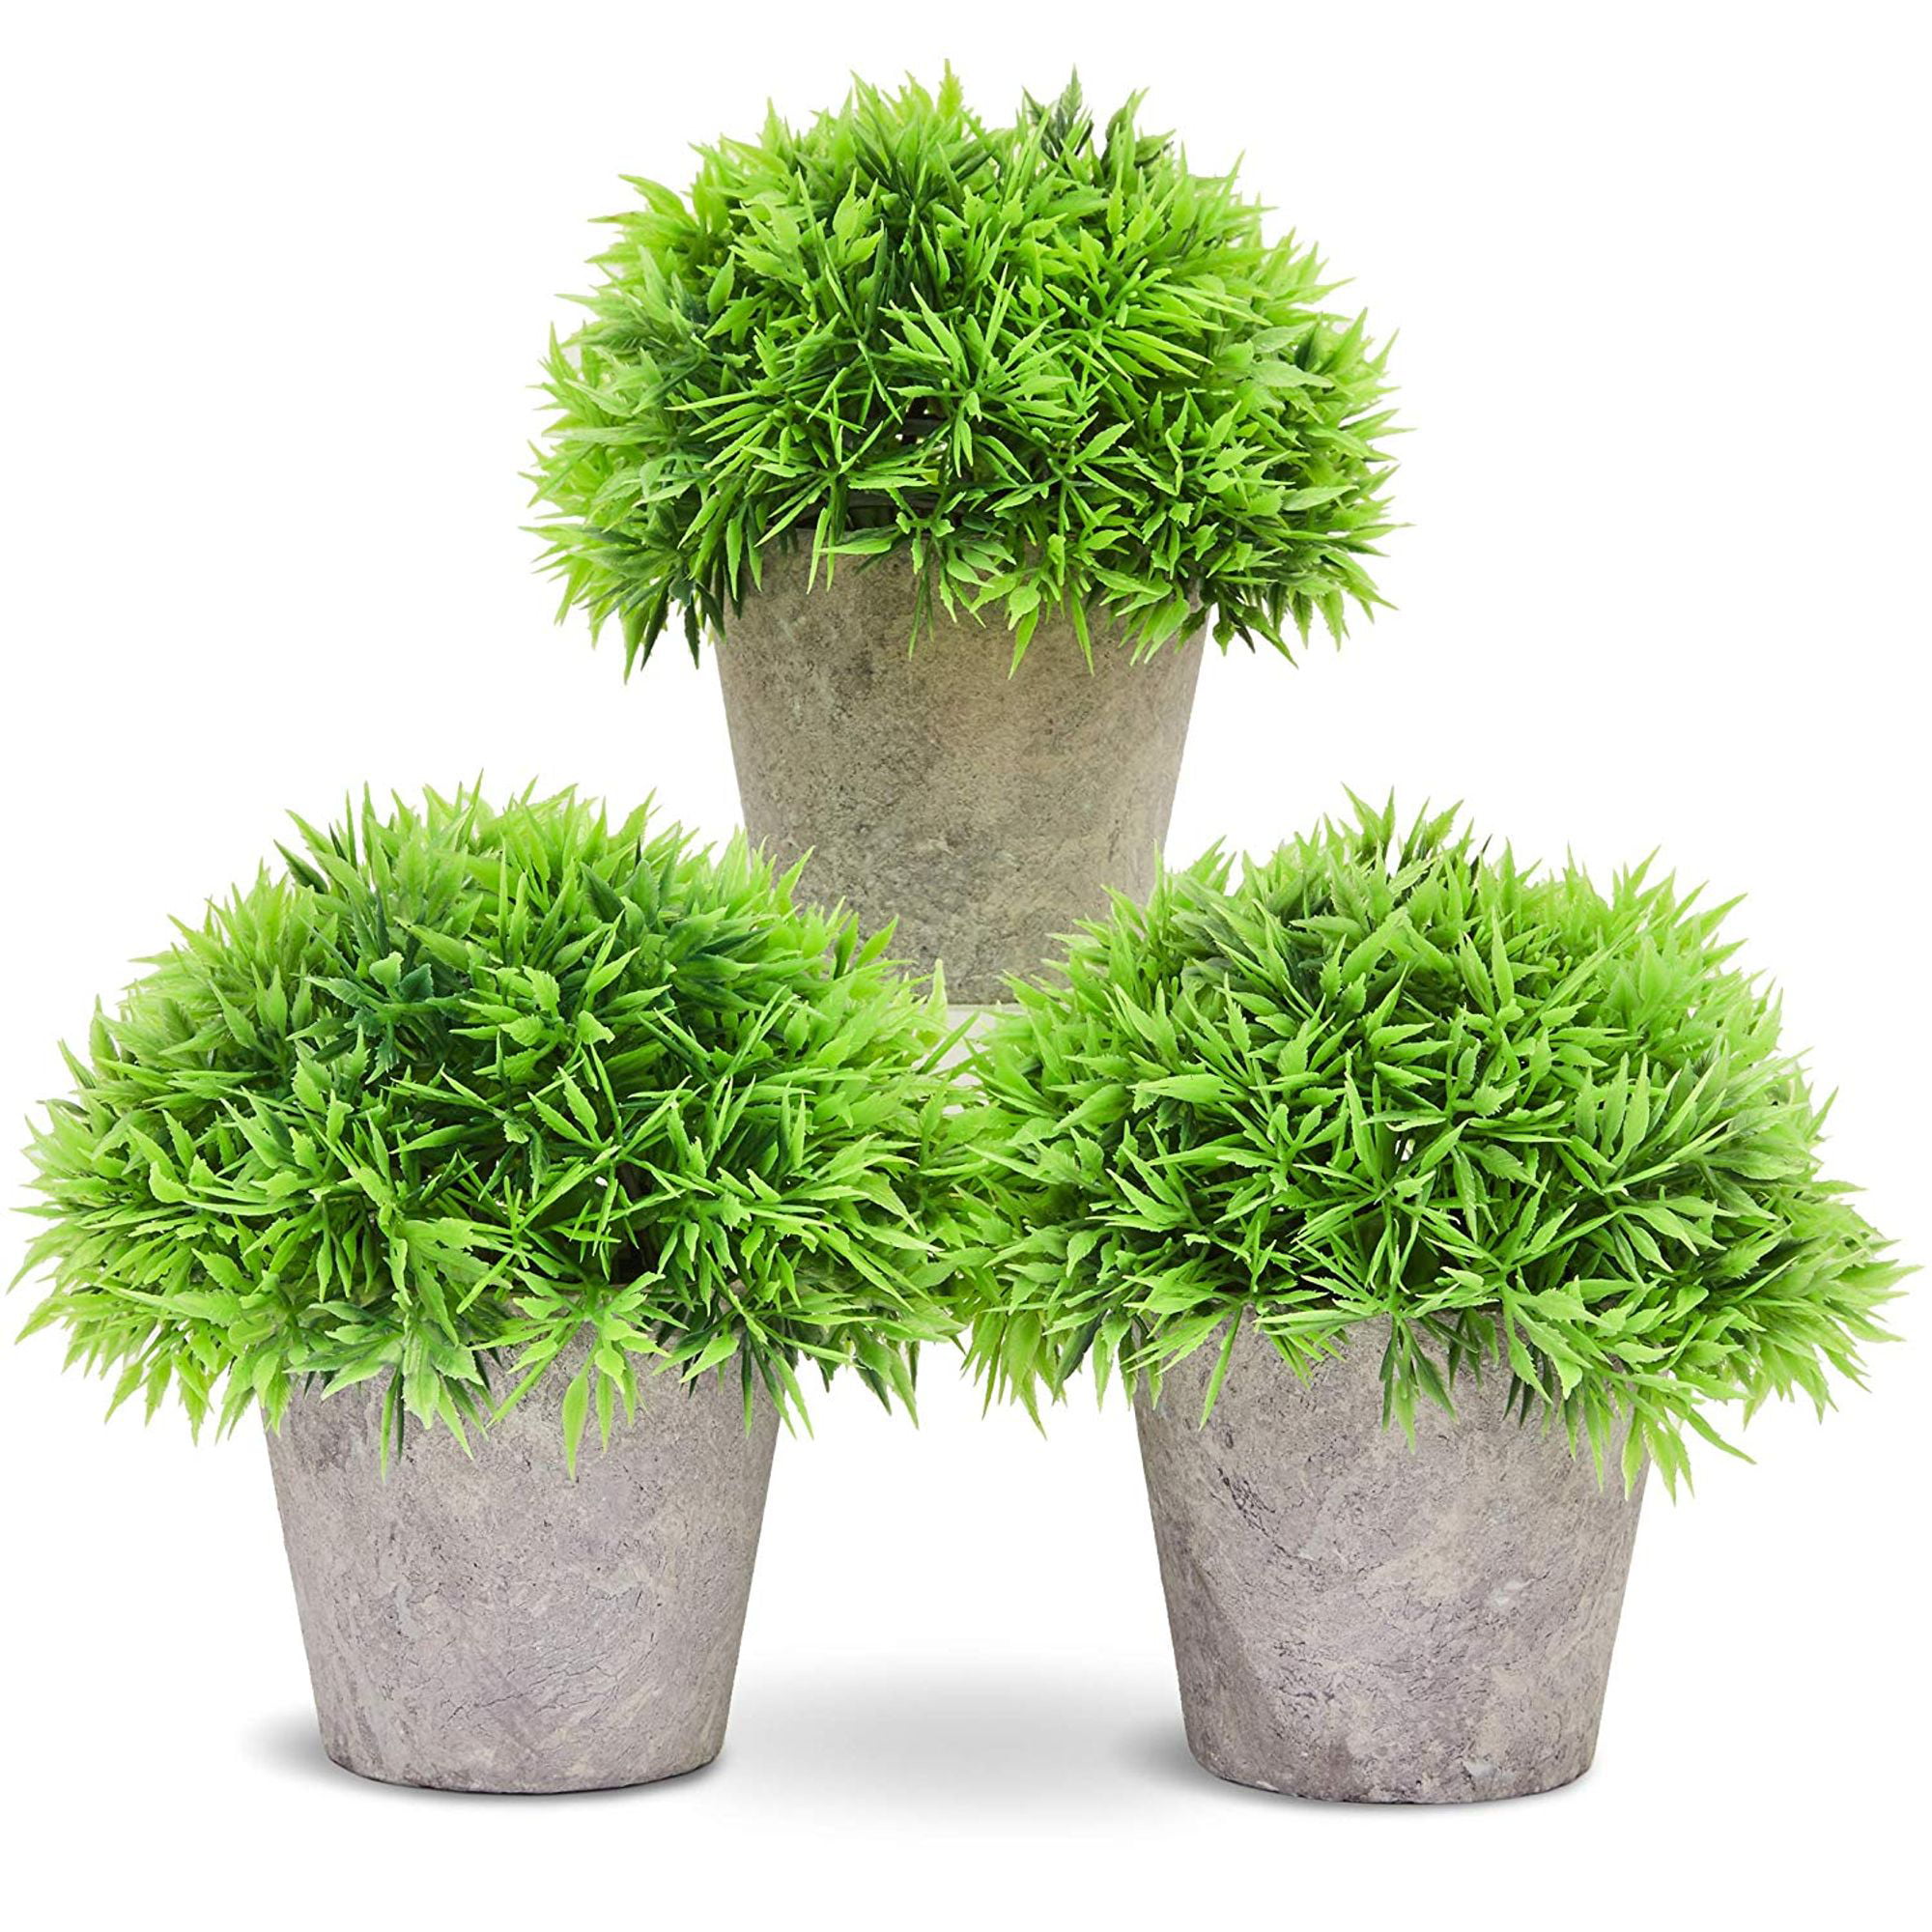 Set of 3 Artificial Plants in Pots, 5" Potted Fake House Plants Home